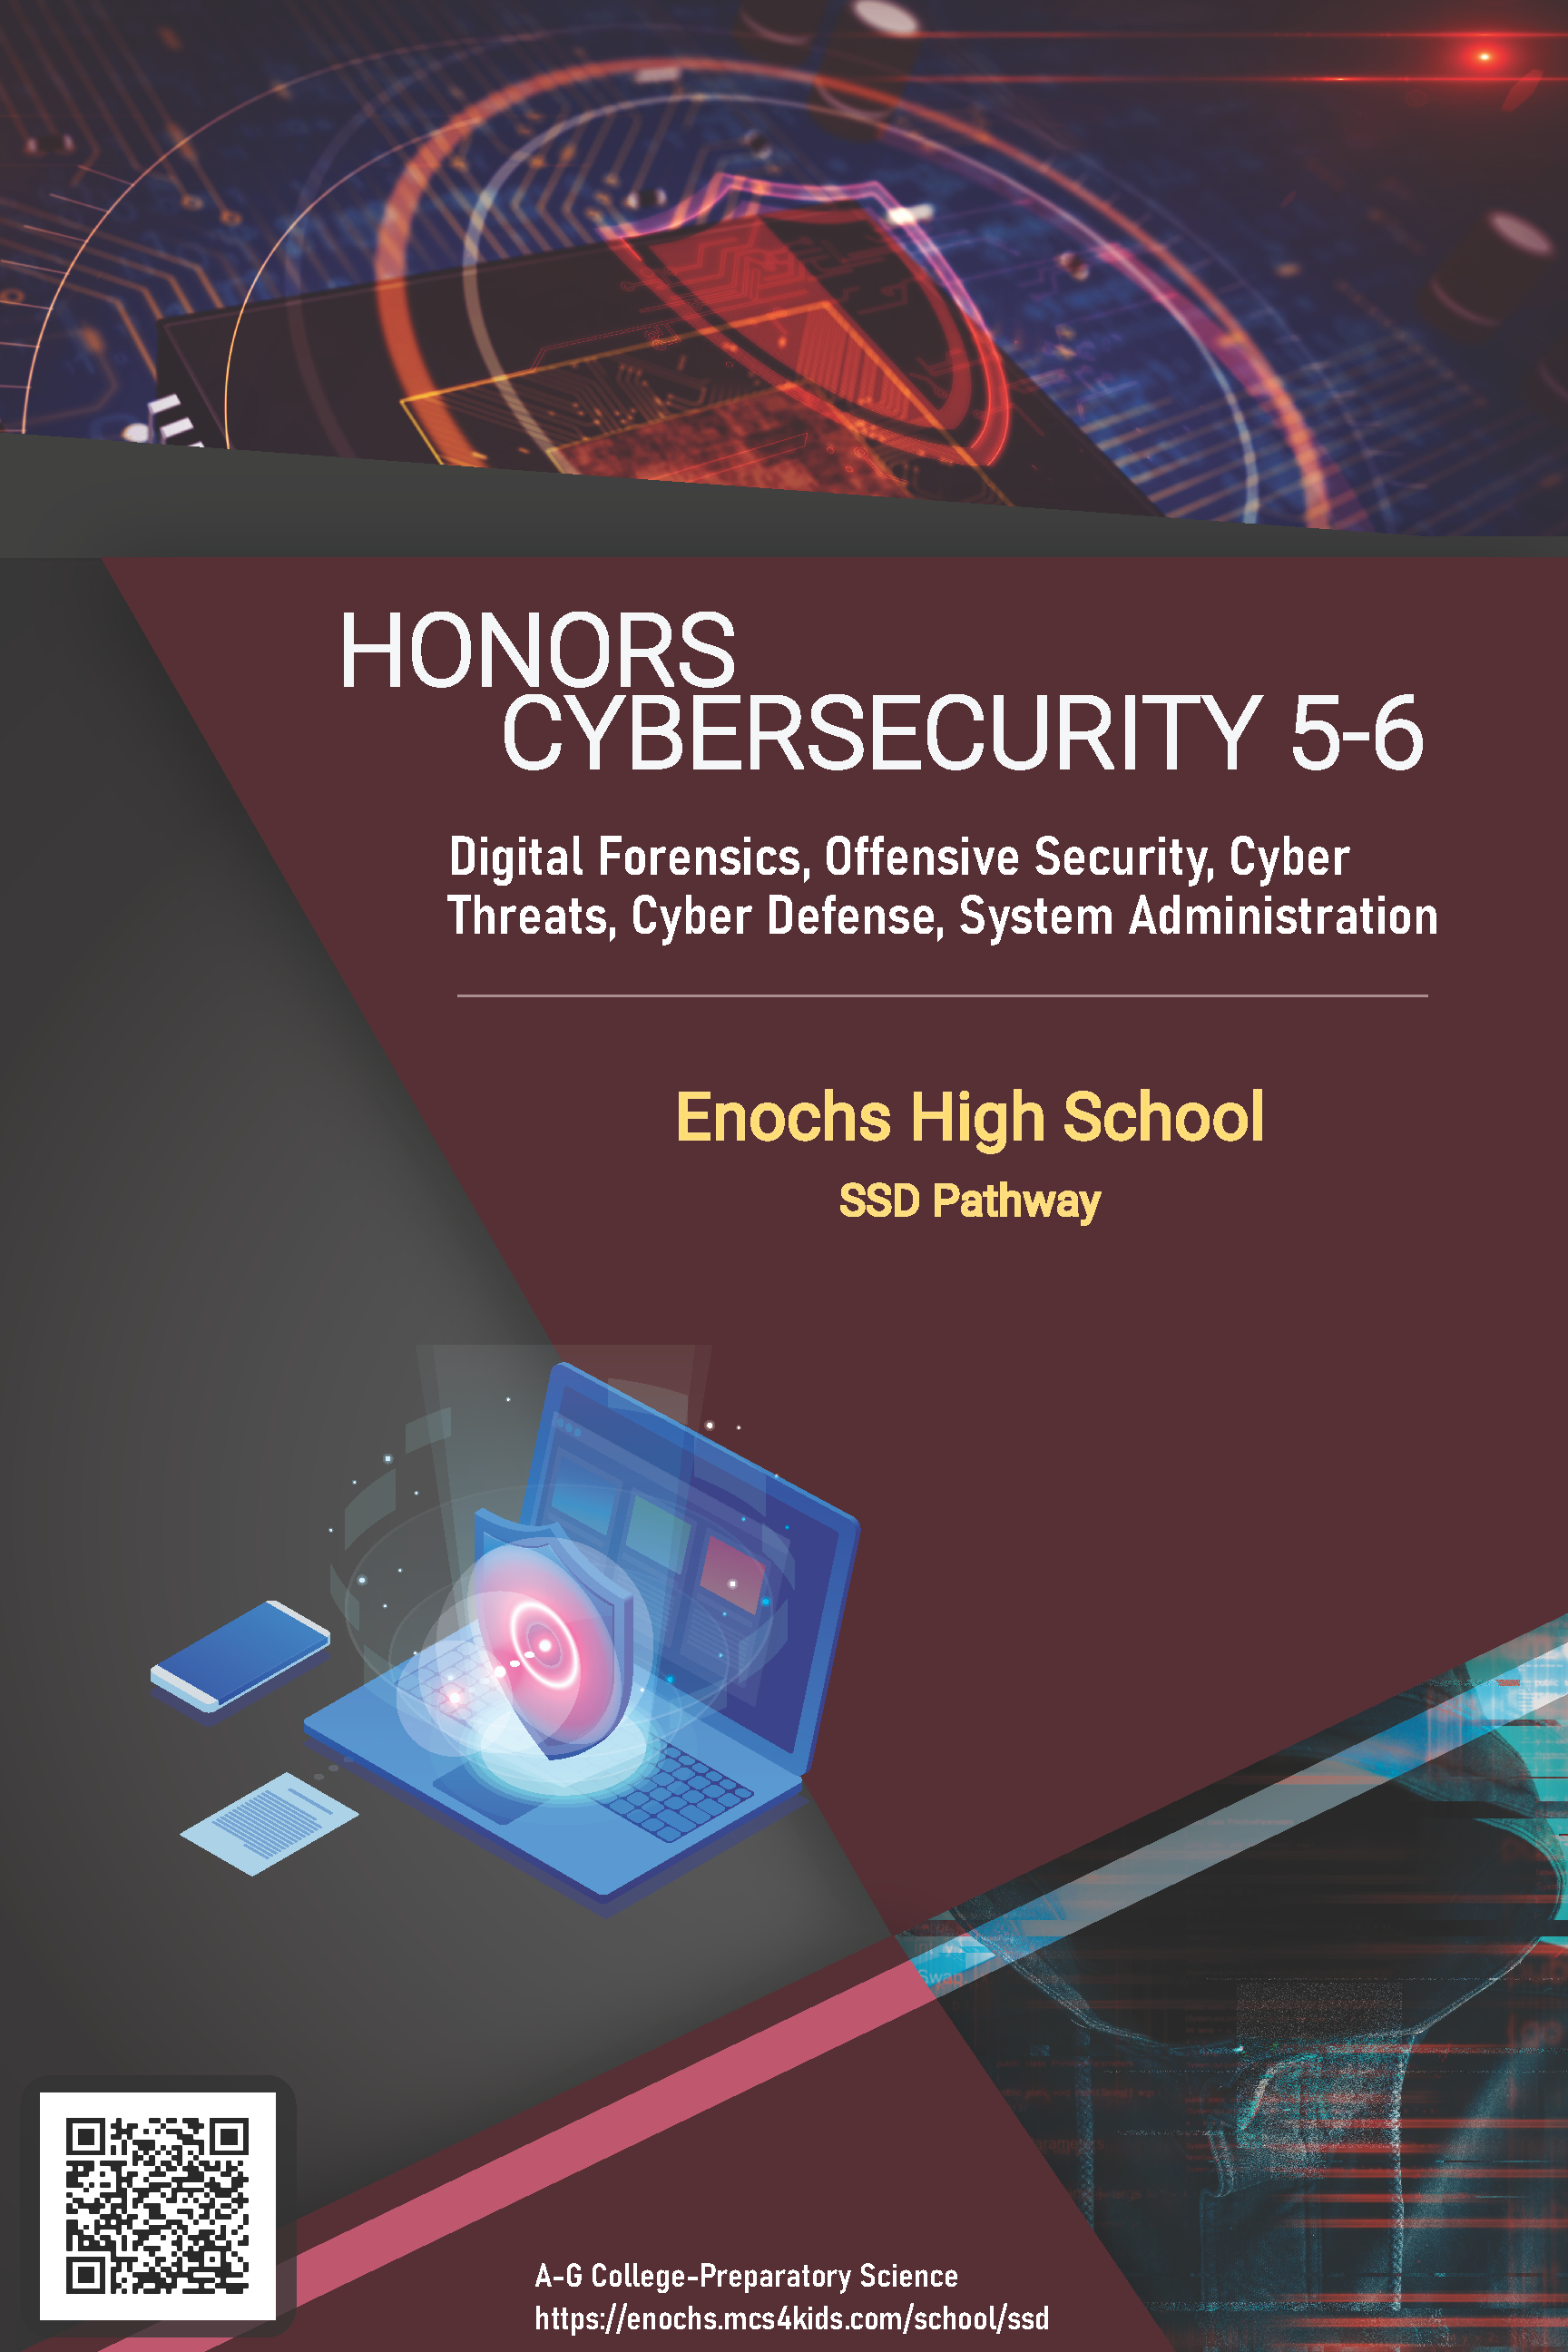 Honors Cybersecurity 5-6